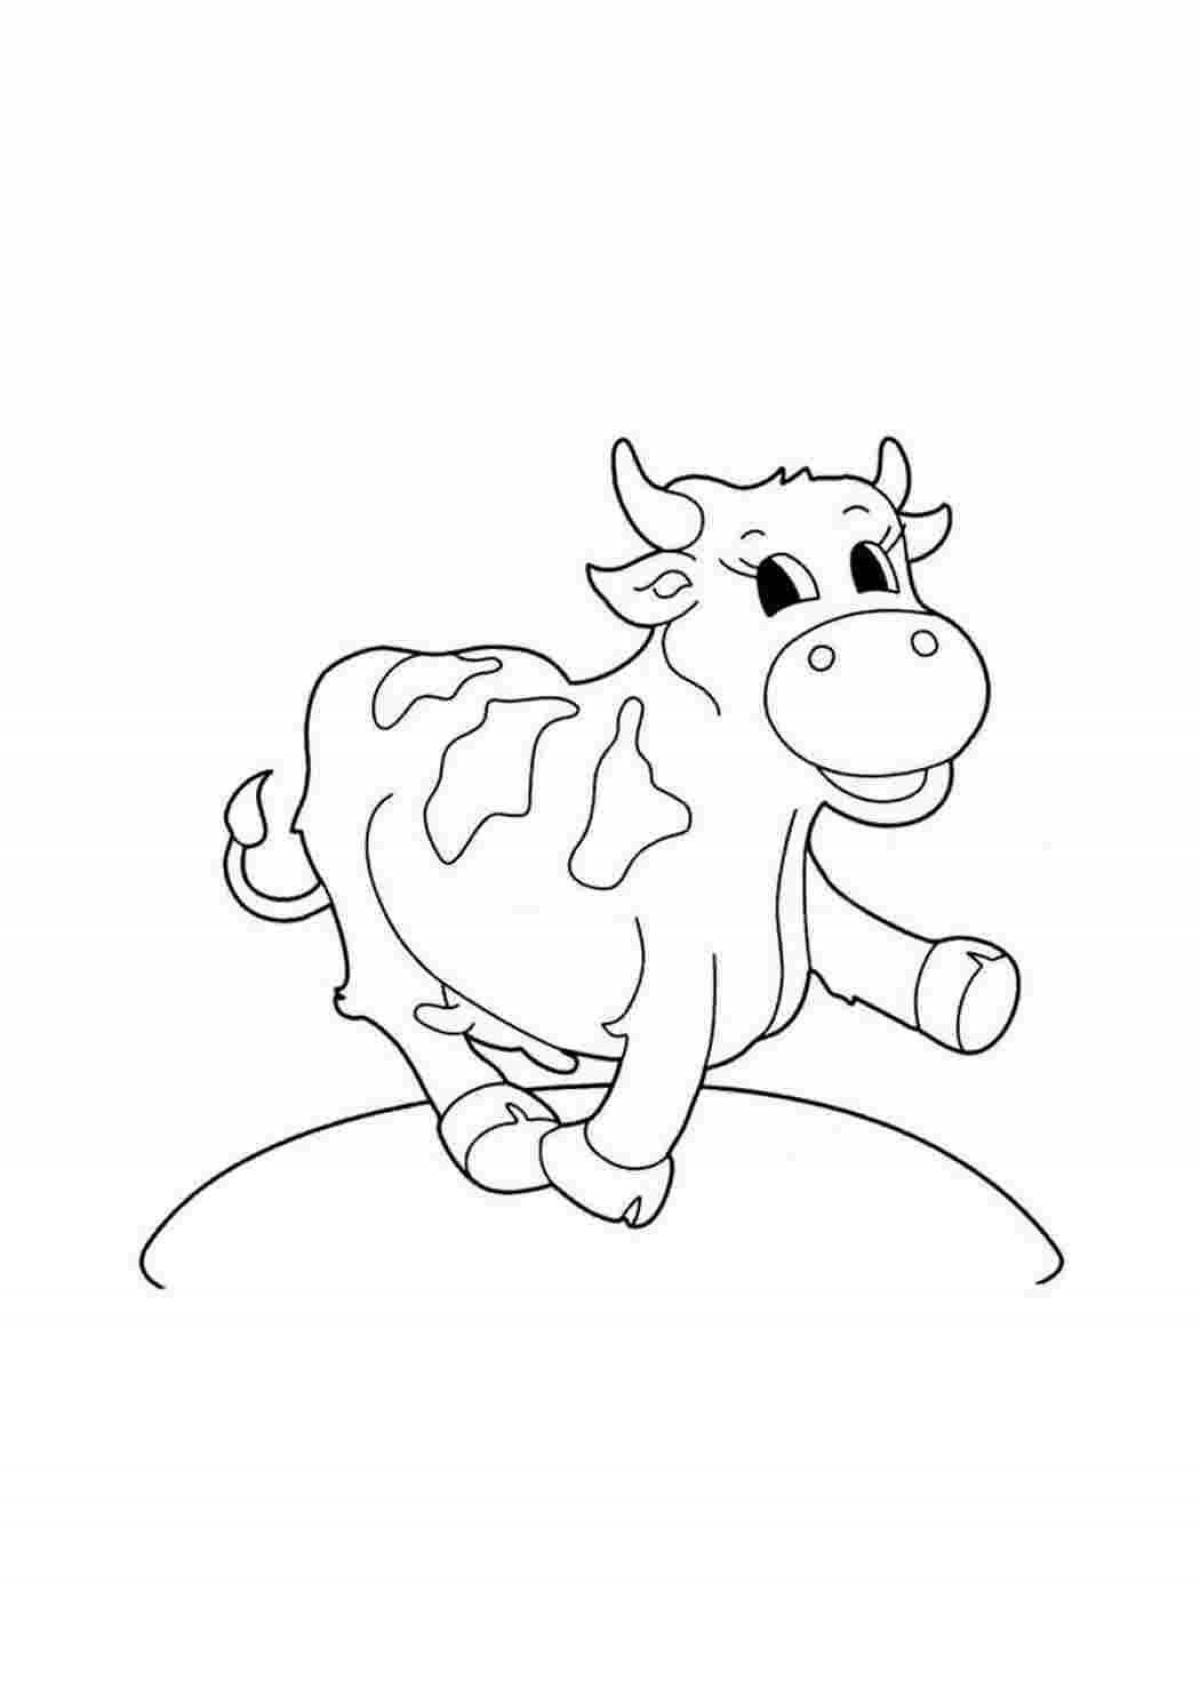 Cow coloring page for kids 5-6 years old